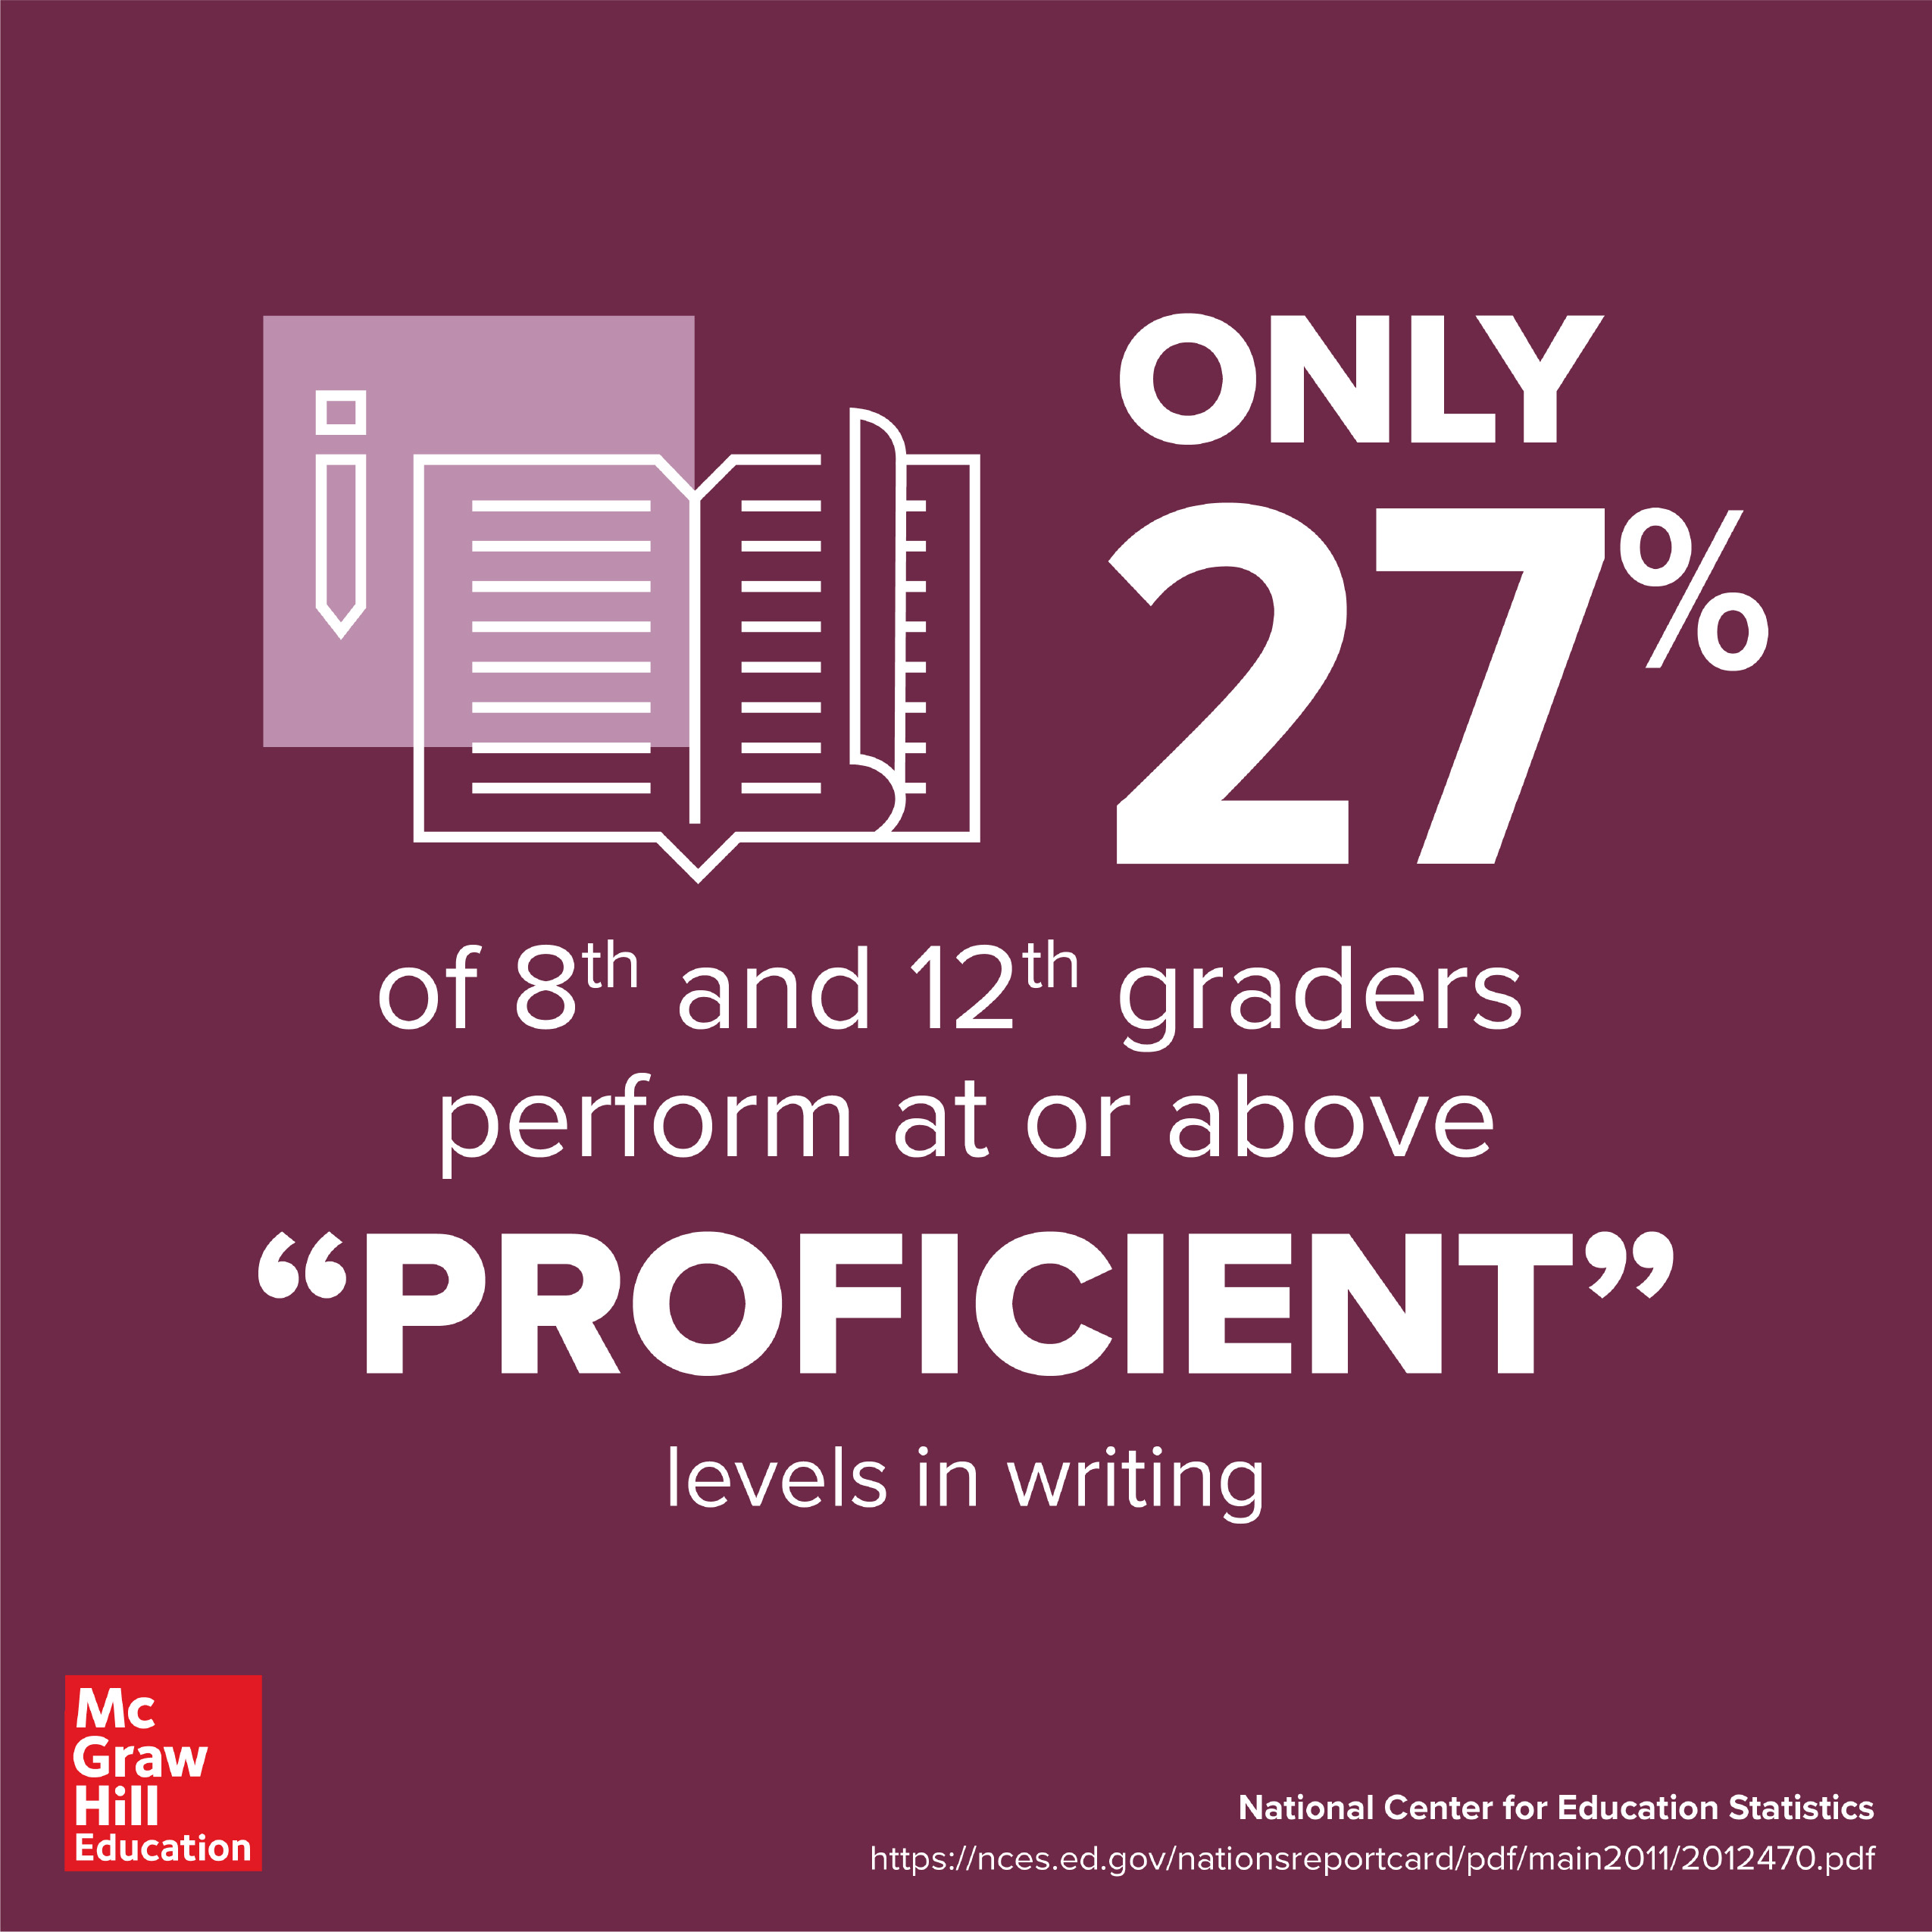 Most 8th and 12th graders are not proficient writers